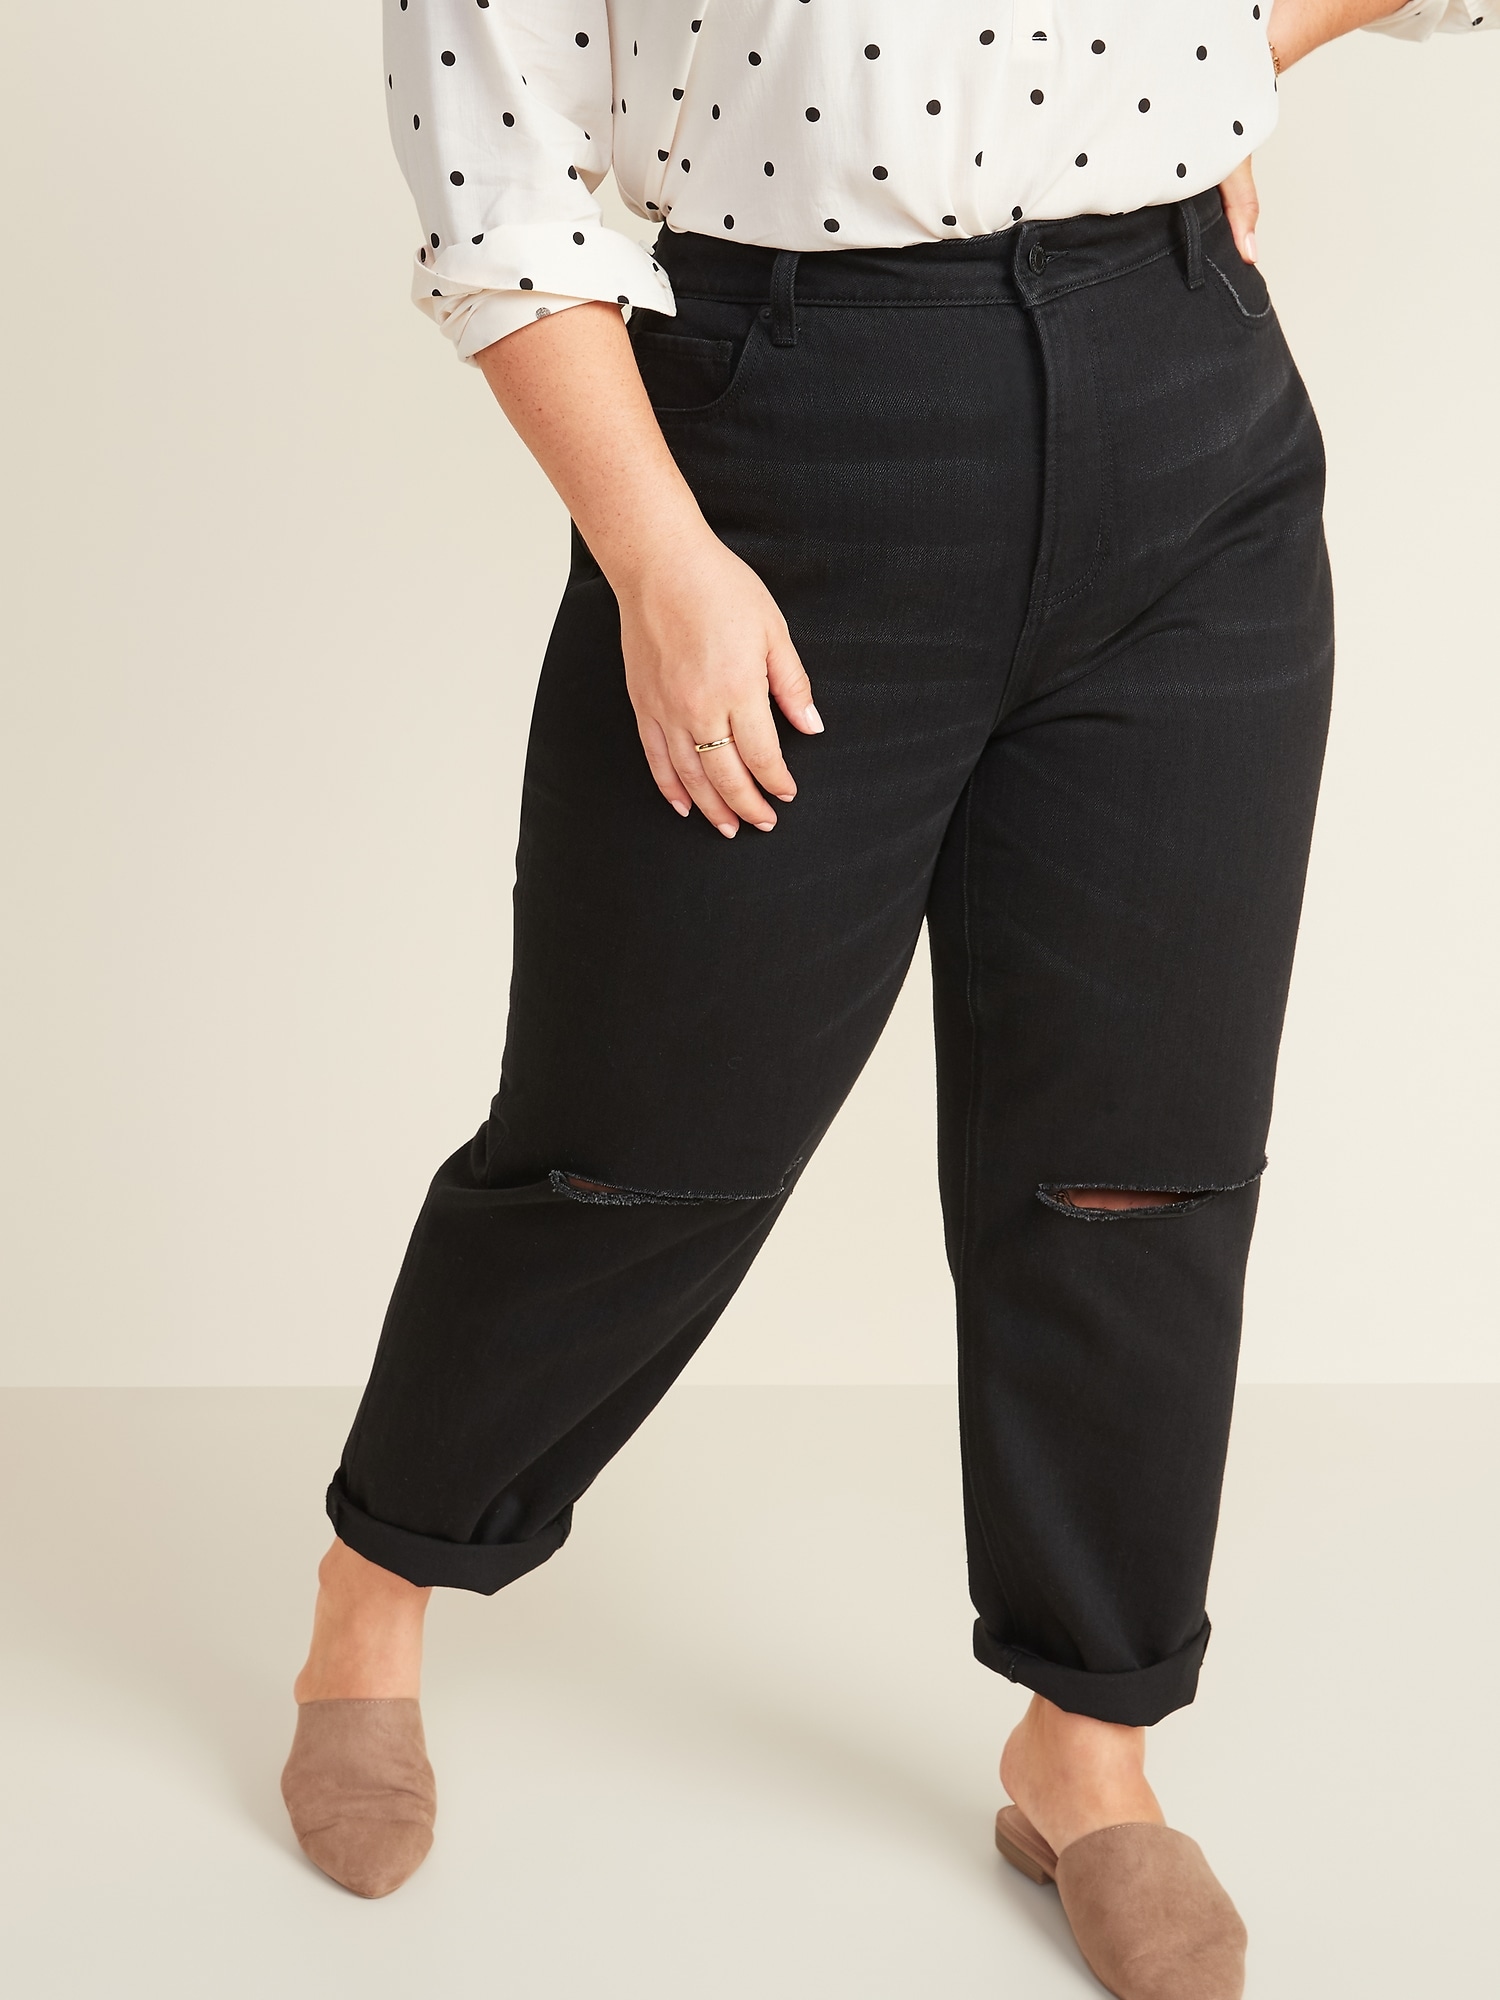 high waisted stretch jeans plus size